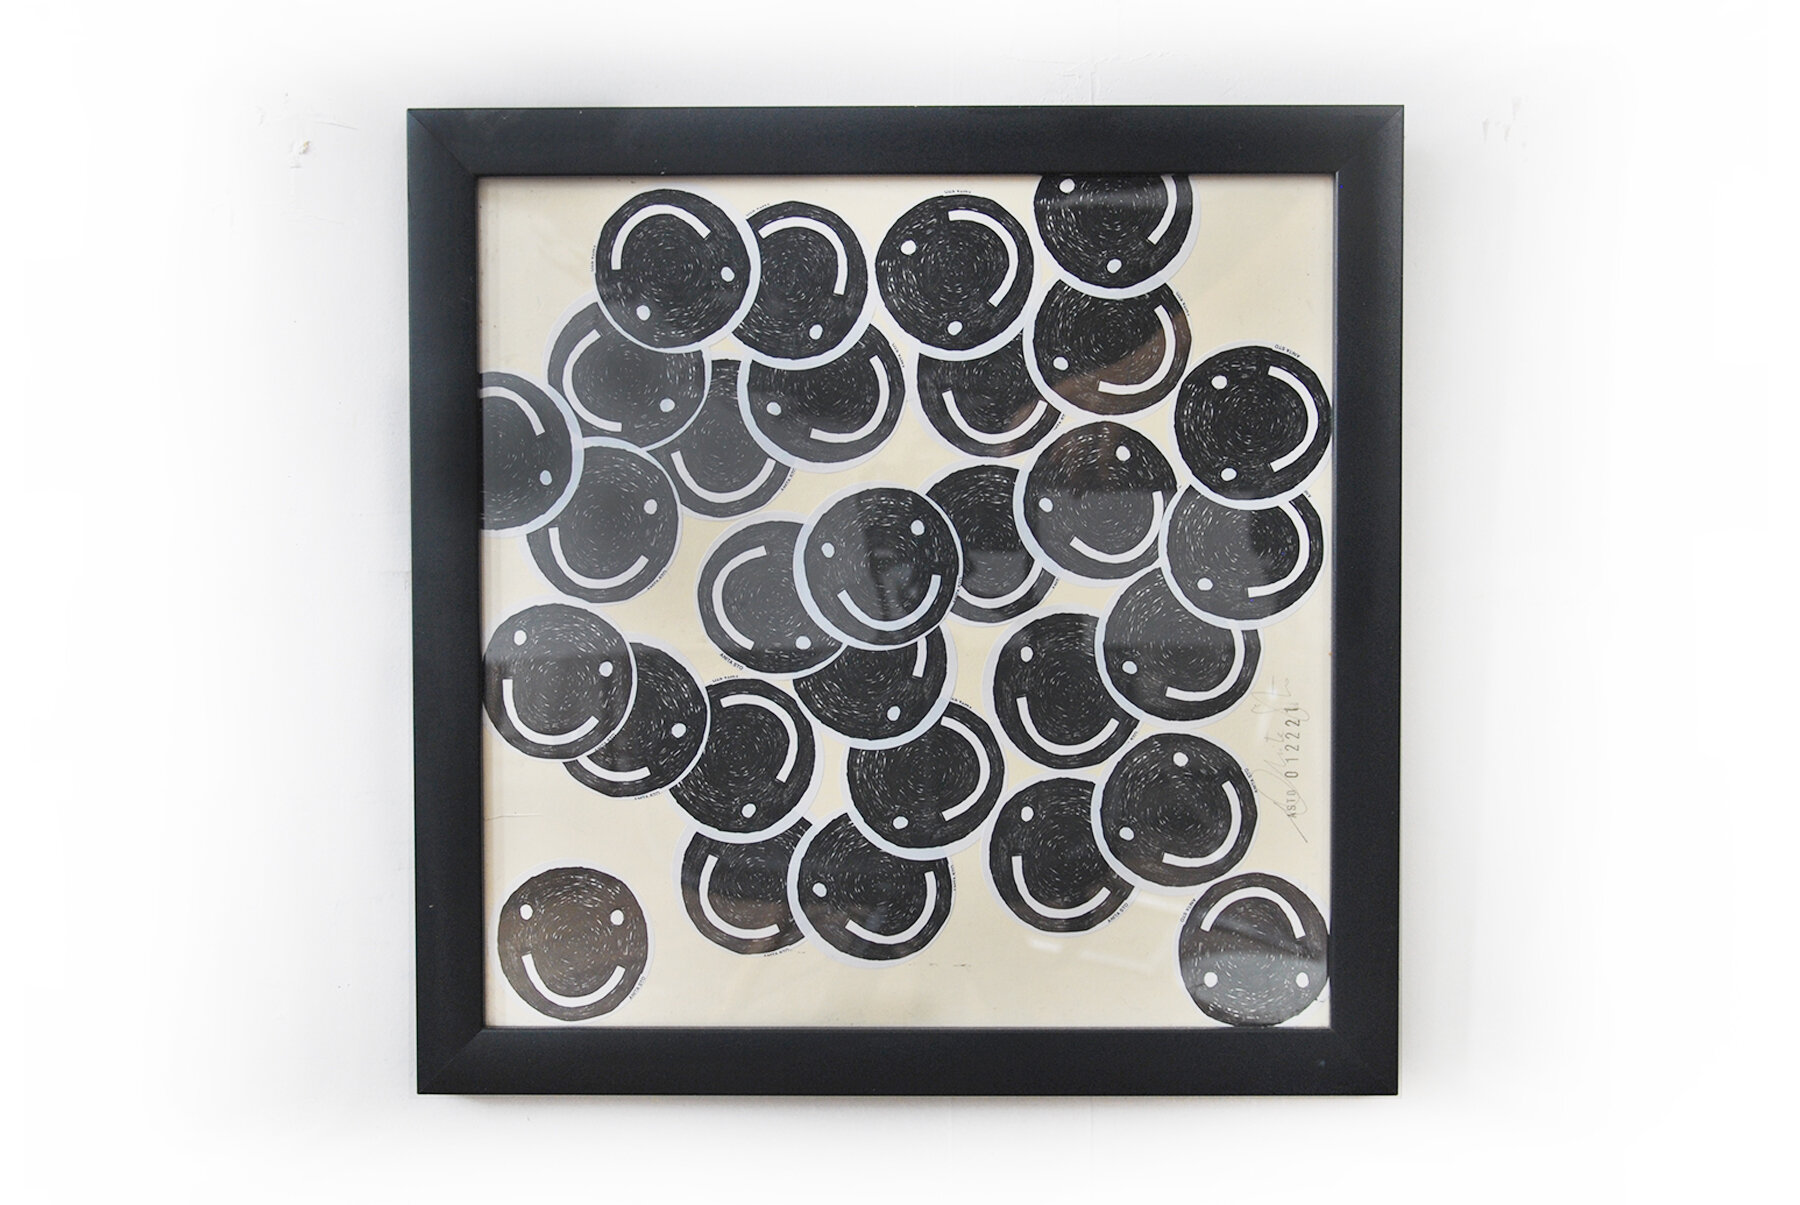   SMILING FACES 2  Vinyl Stickers on Paper Wood frame and Plexiglass 14.5” x 14.5” 2020 